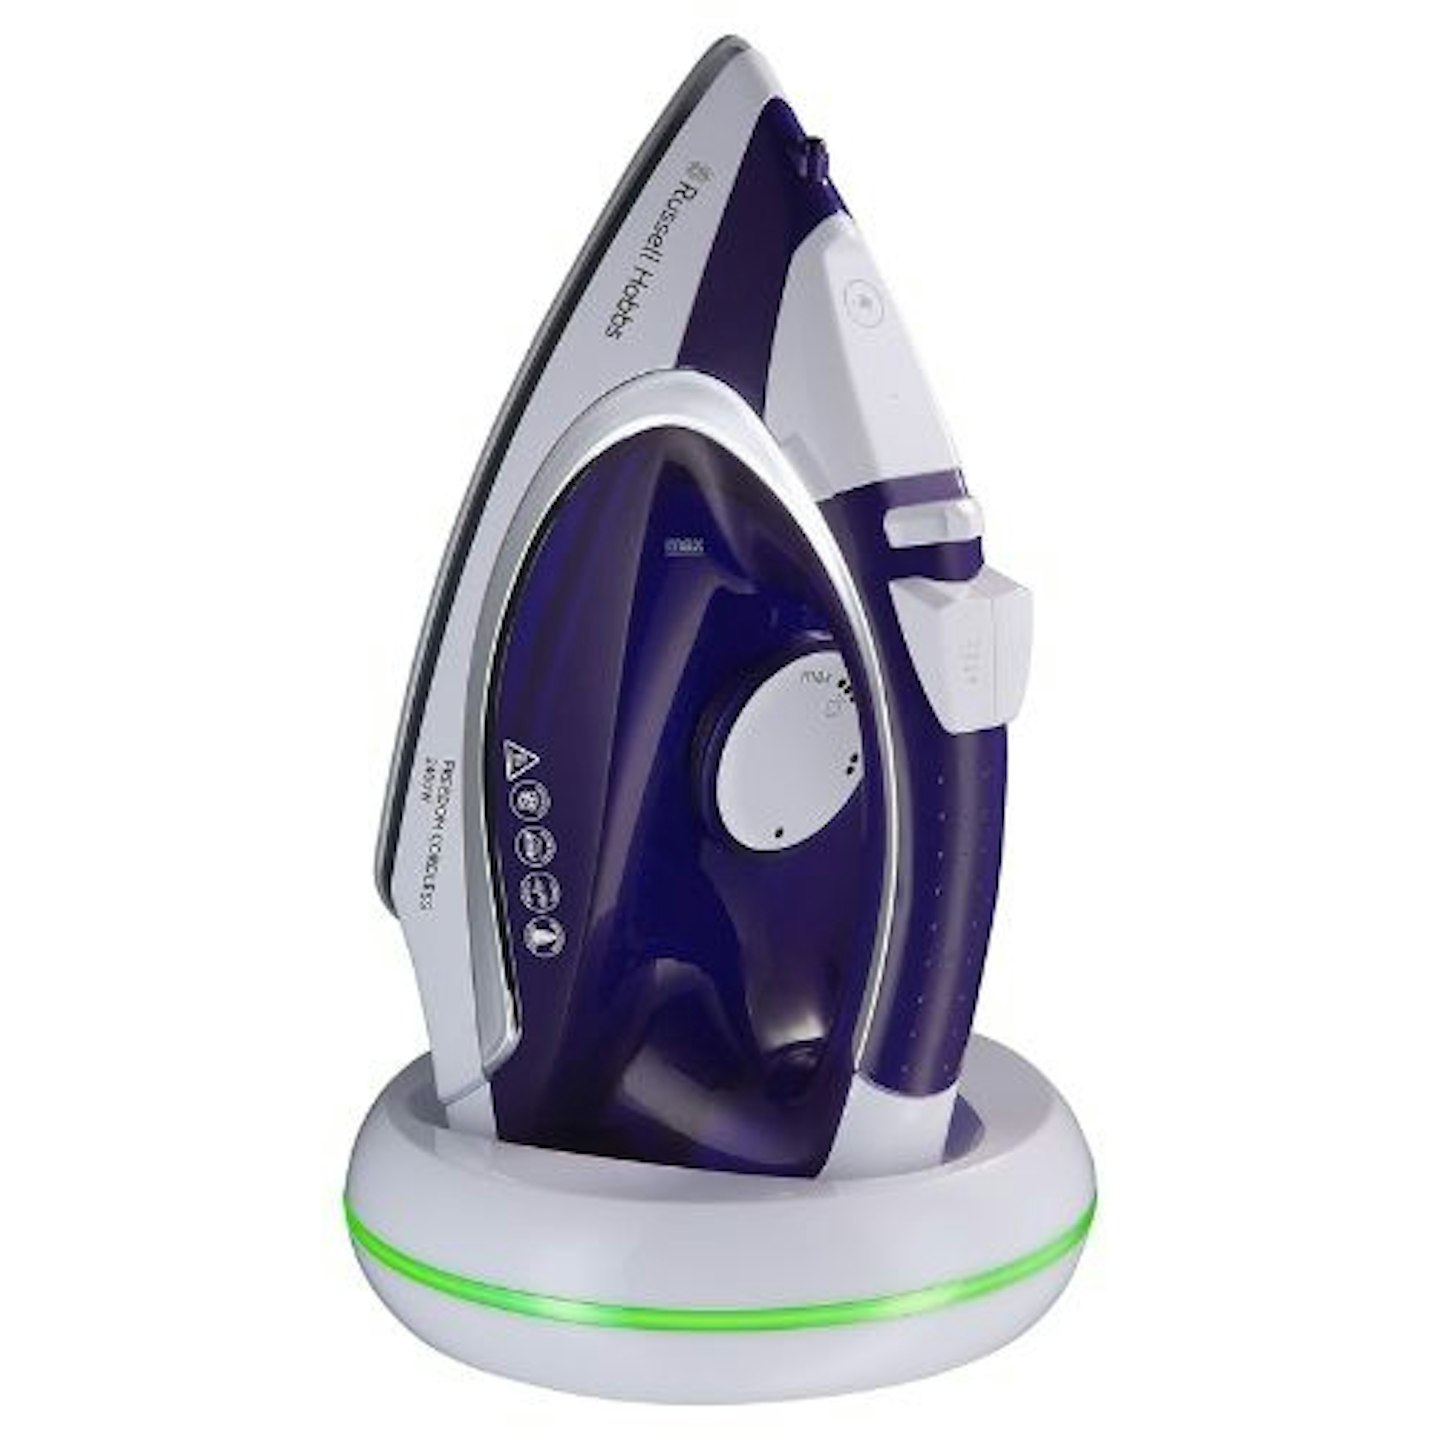  Russell Hobbs Freedom Cordless Steam Iron, Fast 5 seconds re-charge,